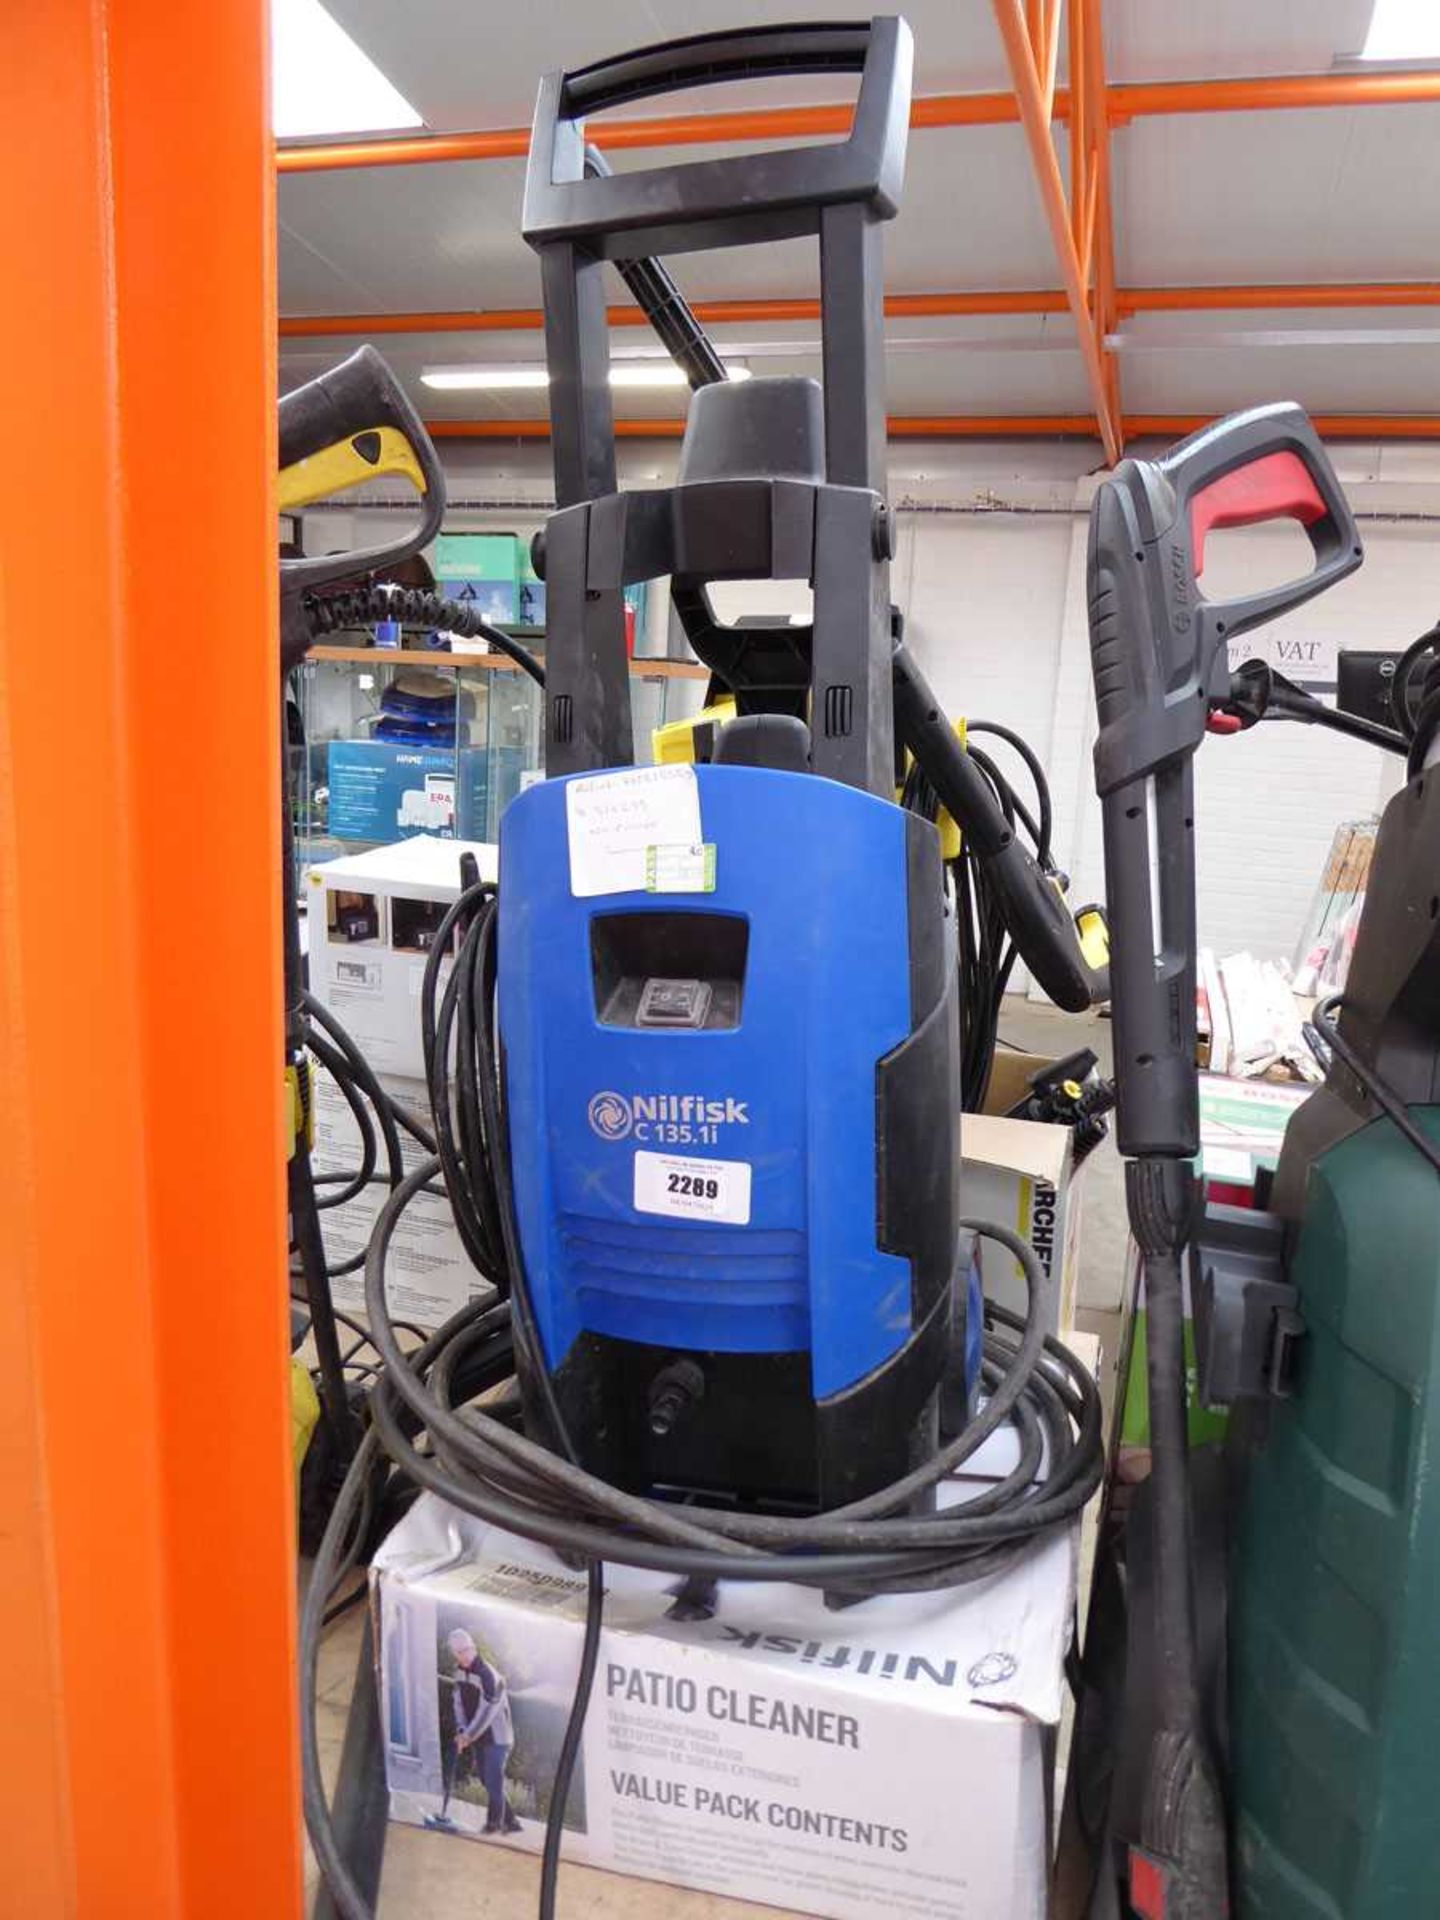 +VAT Nilfisk C135-1I electric pressure washer with lance and patio cleaner attachment